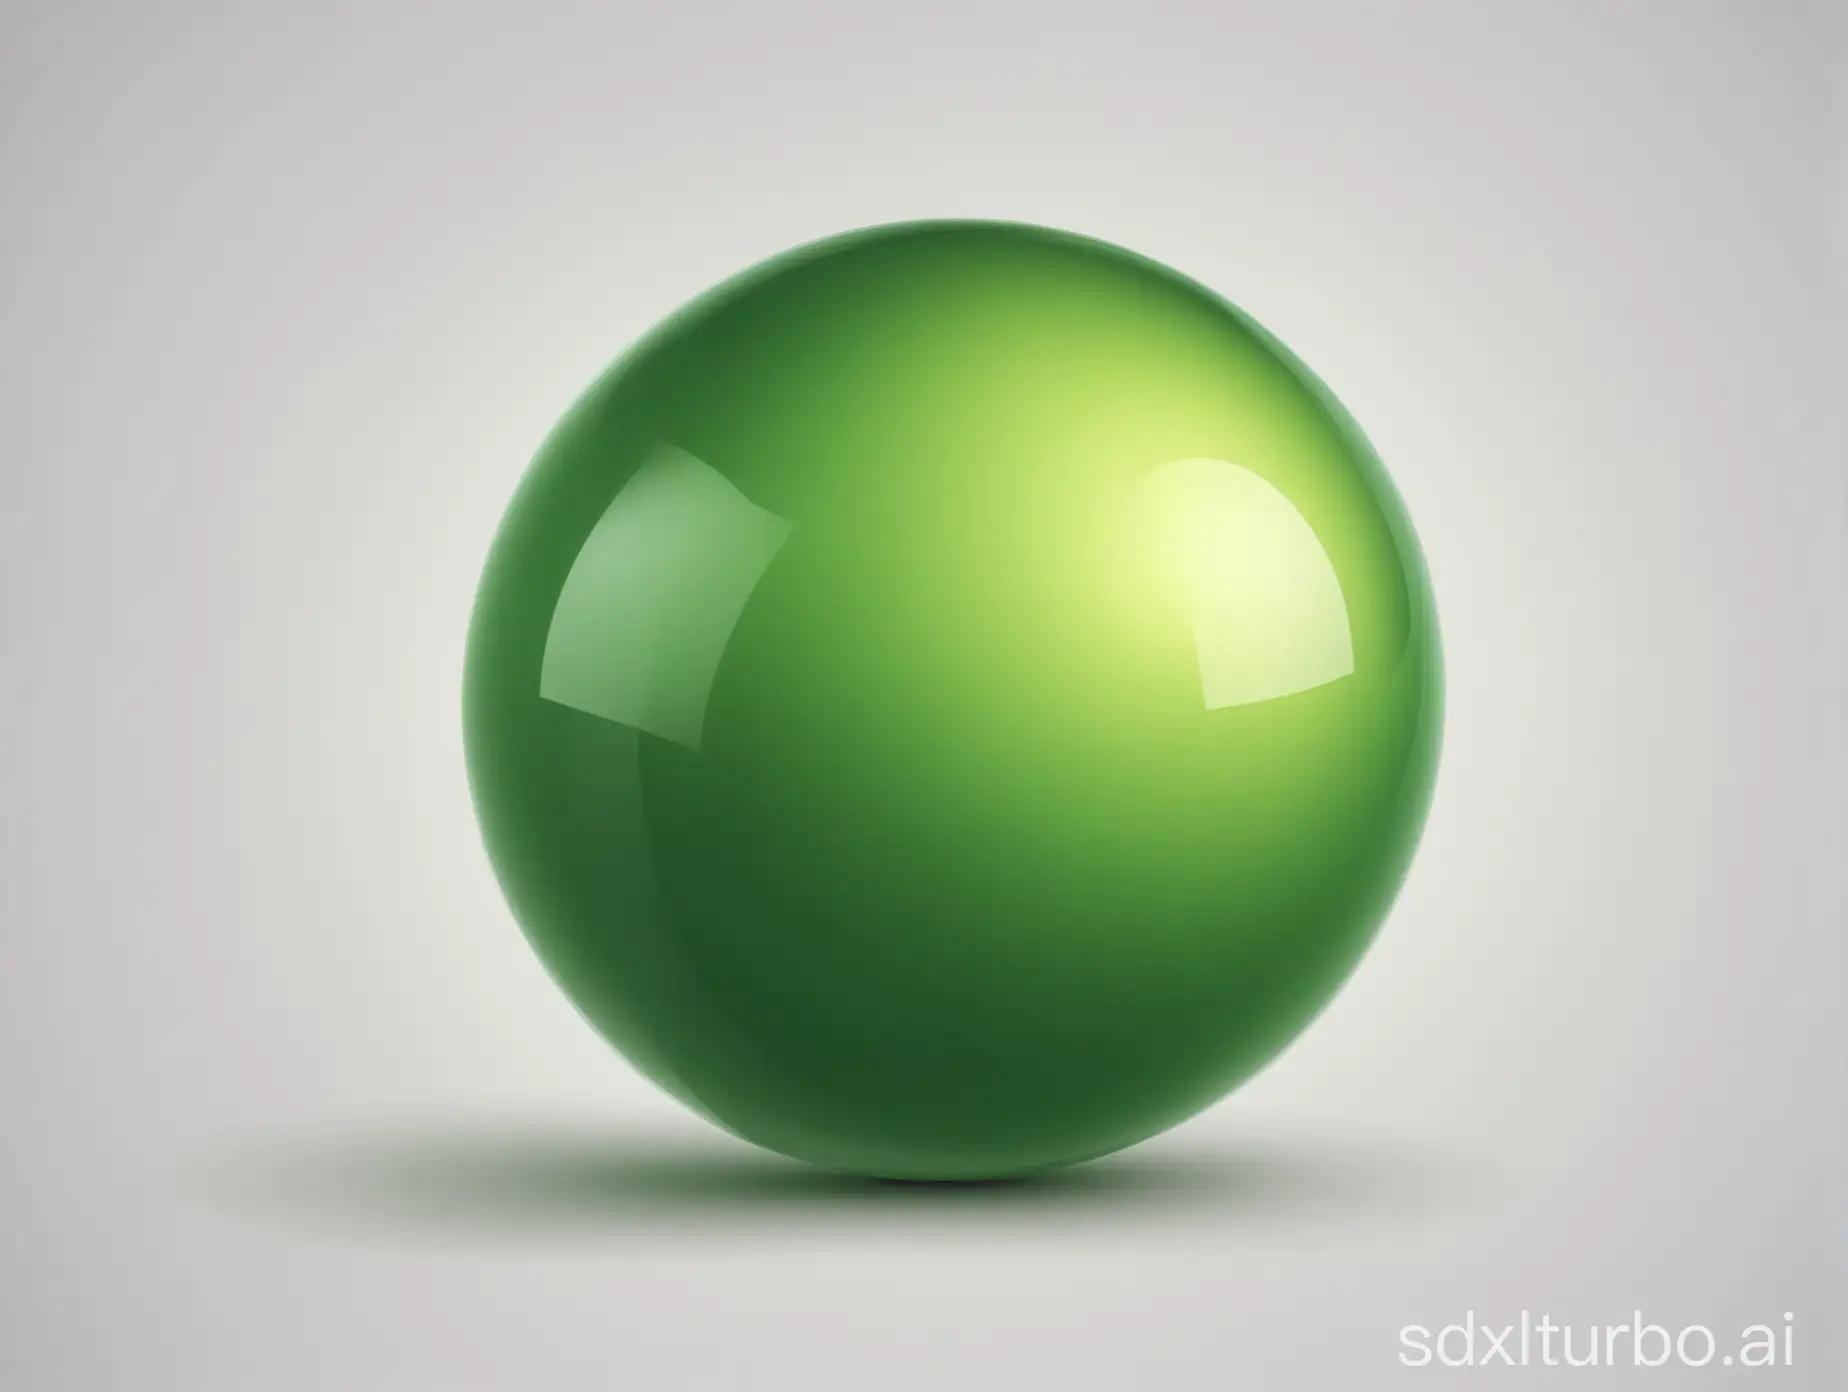 Vibrant-Green-Smooth-Sphere-on-Transparent-Background